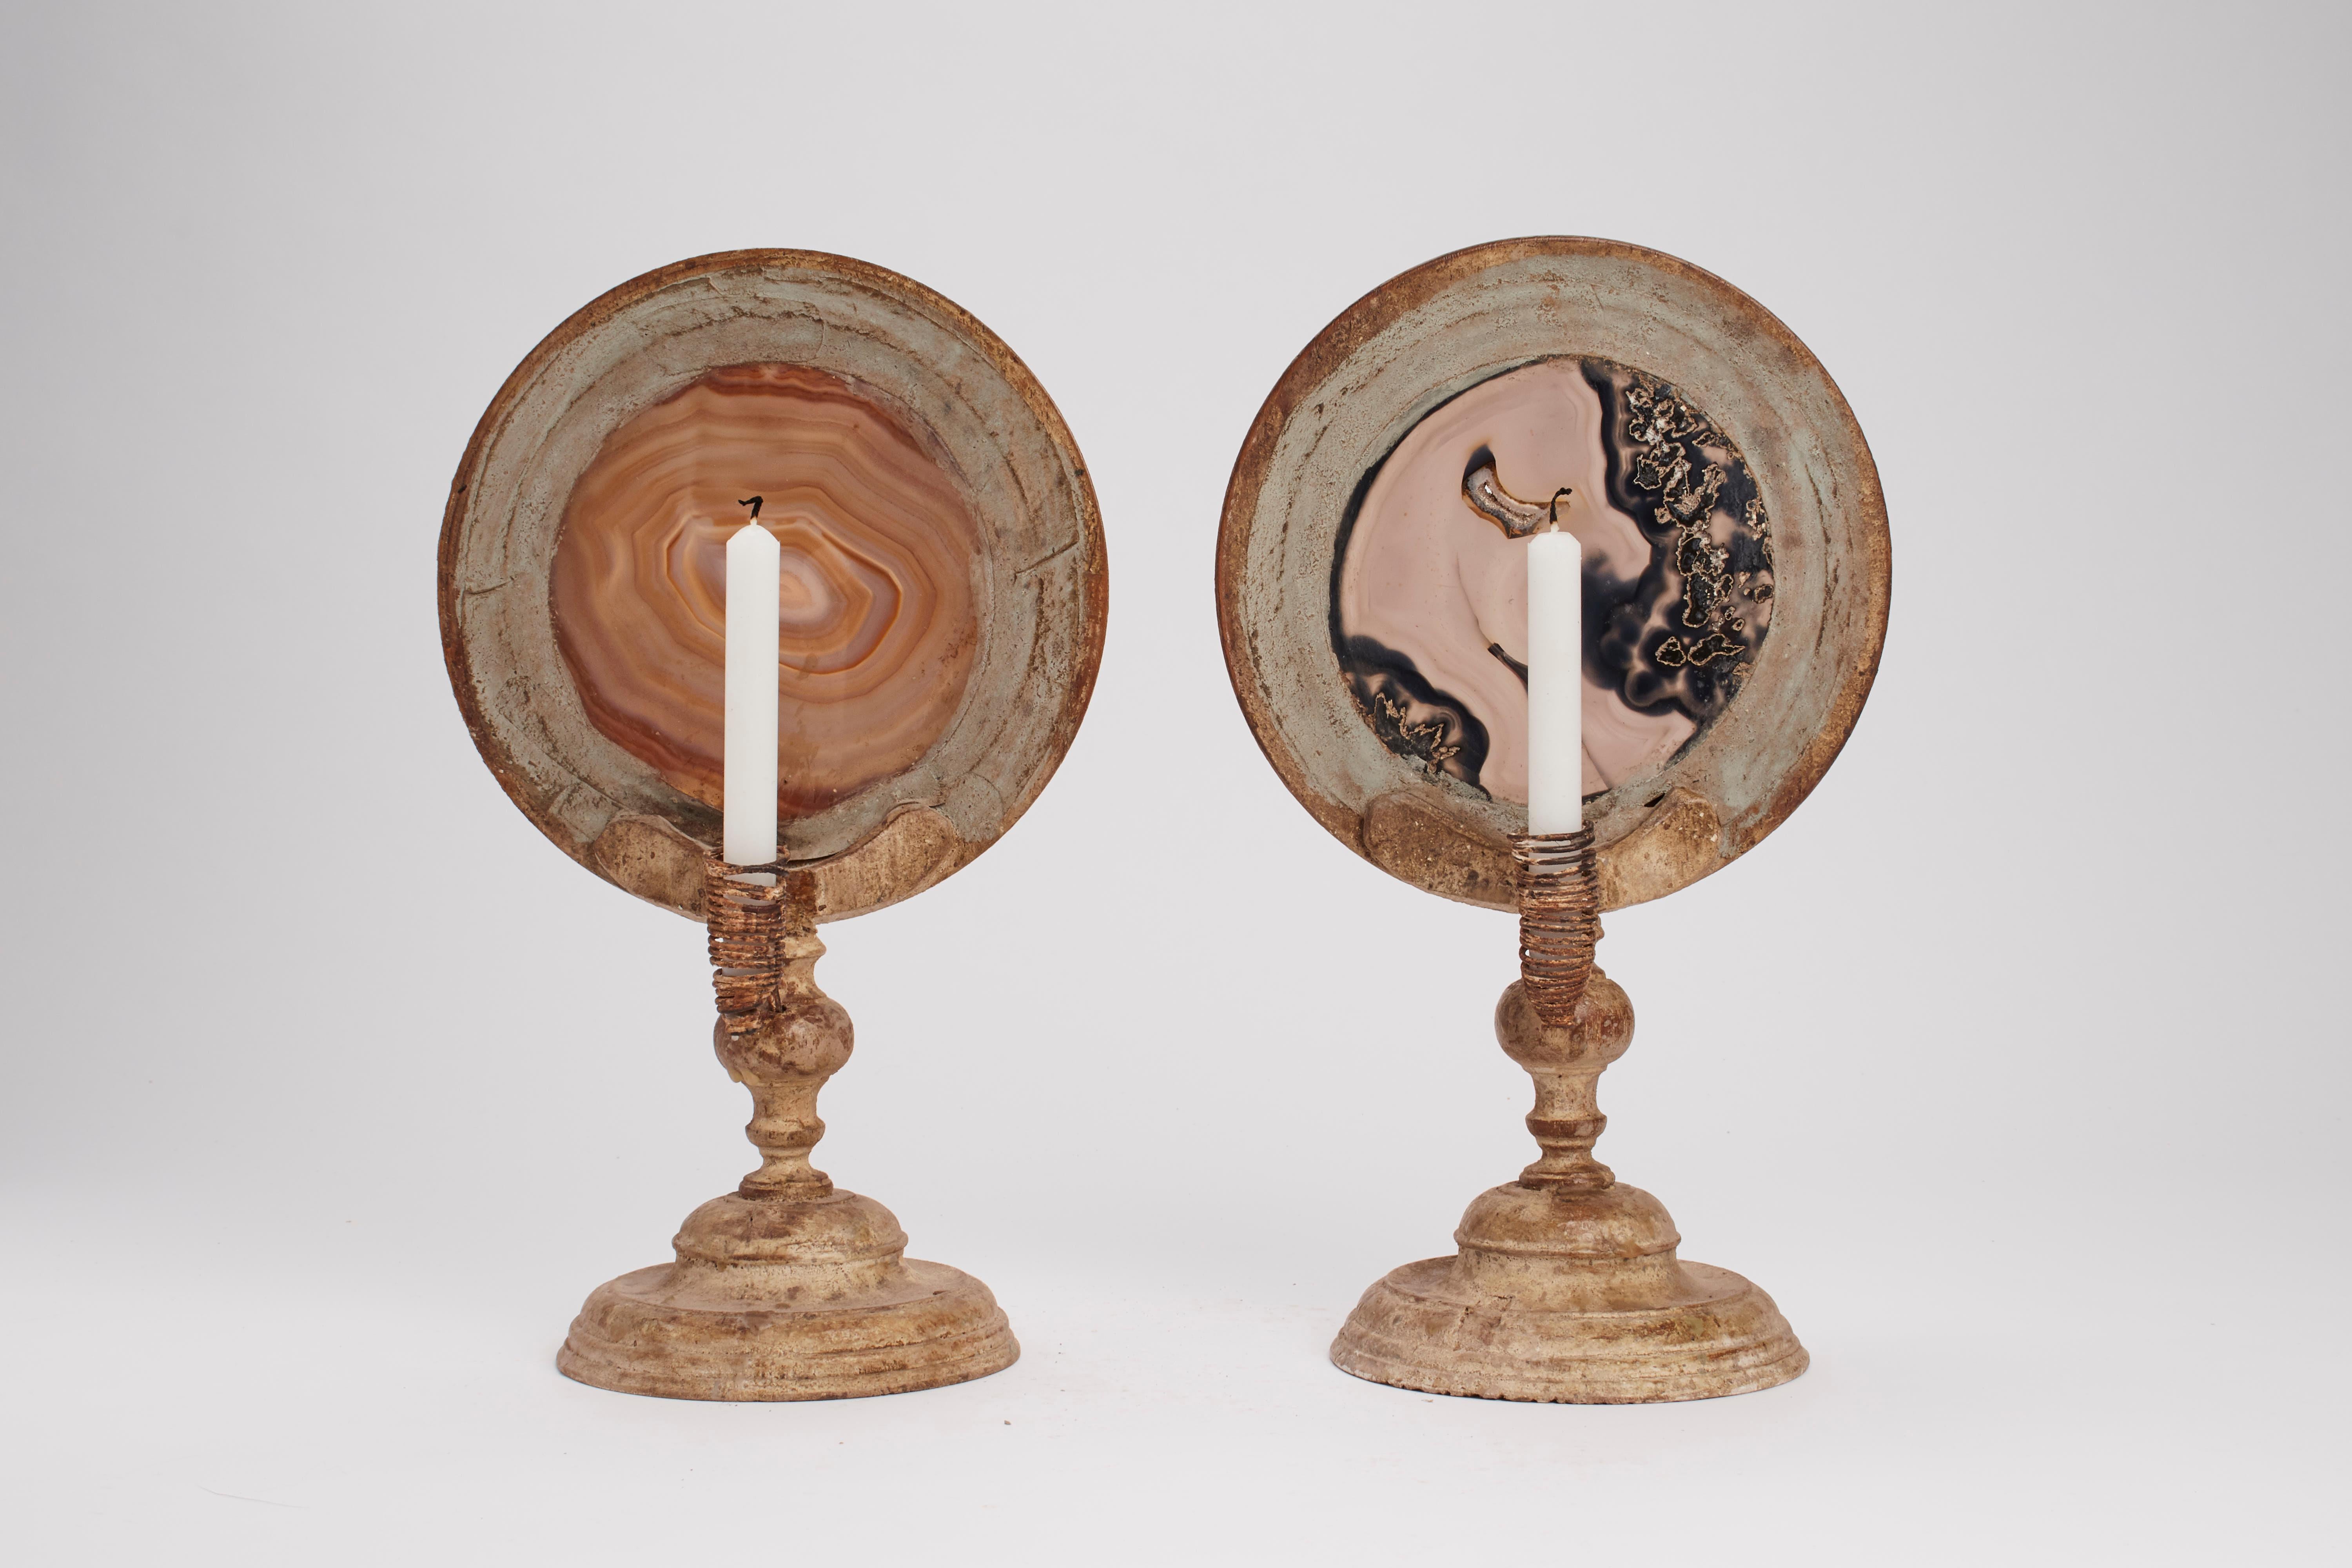 A pair of Wunderkammer naturalia round shape agate specimens with light gray wooden frames, mounted over light gray wooden bases, with candle holders. Italy, 1880 ca.